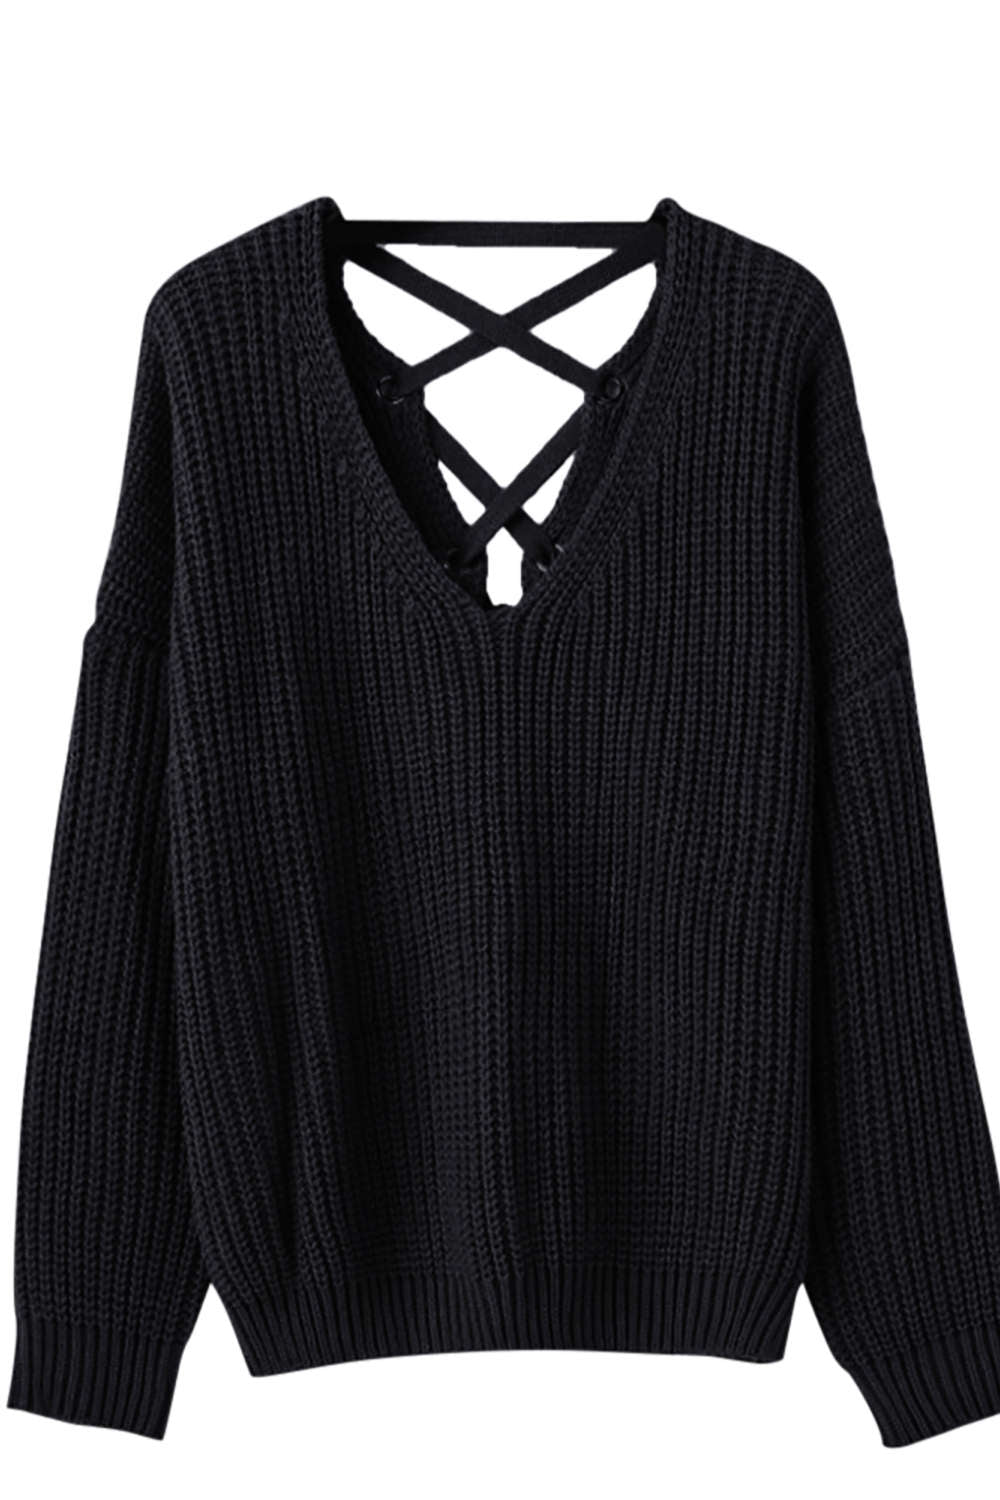 Iyasson Lace Up Back Jumper